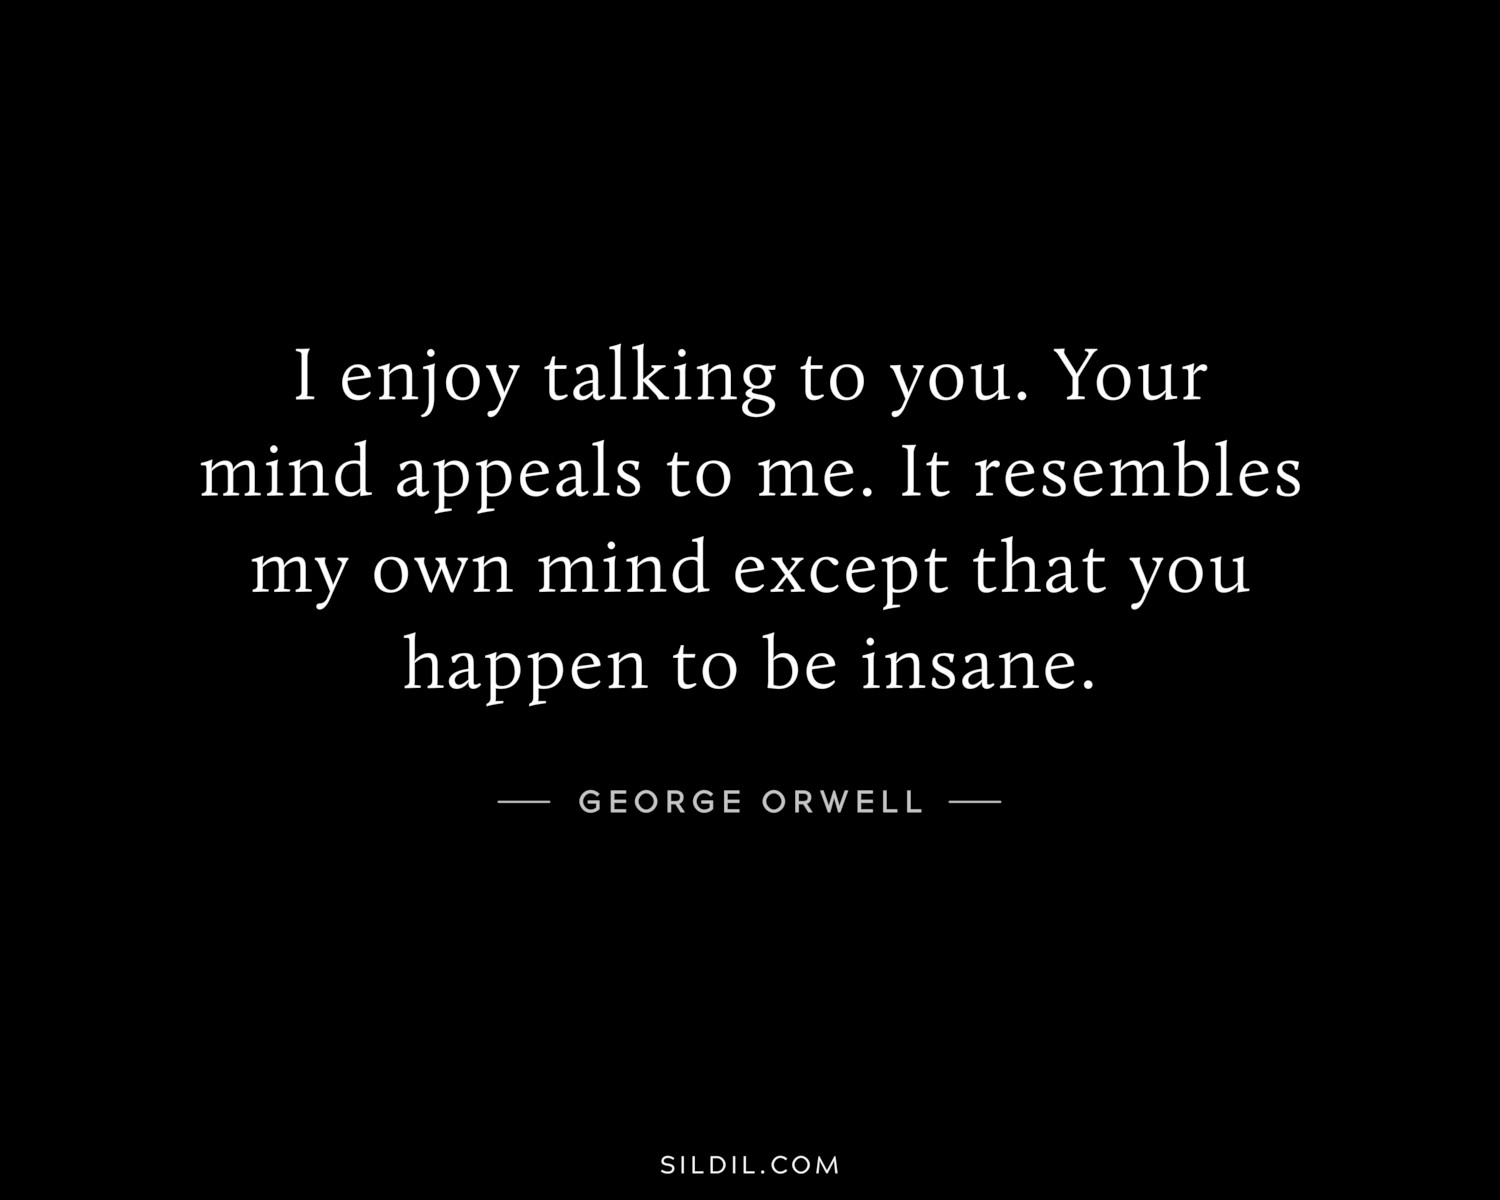 I enjoy talking to you. Your mind appeals to me. It resembles my own mind except that you happen to be insane.